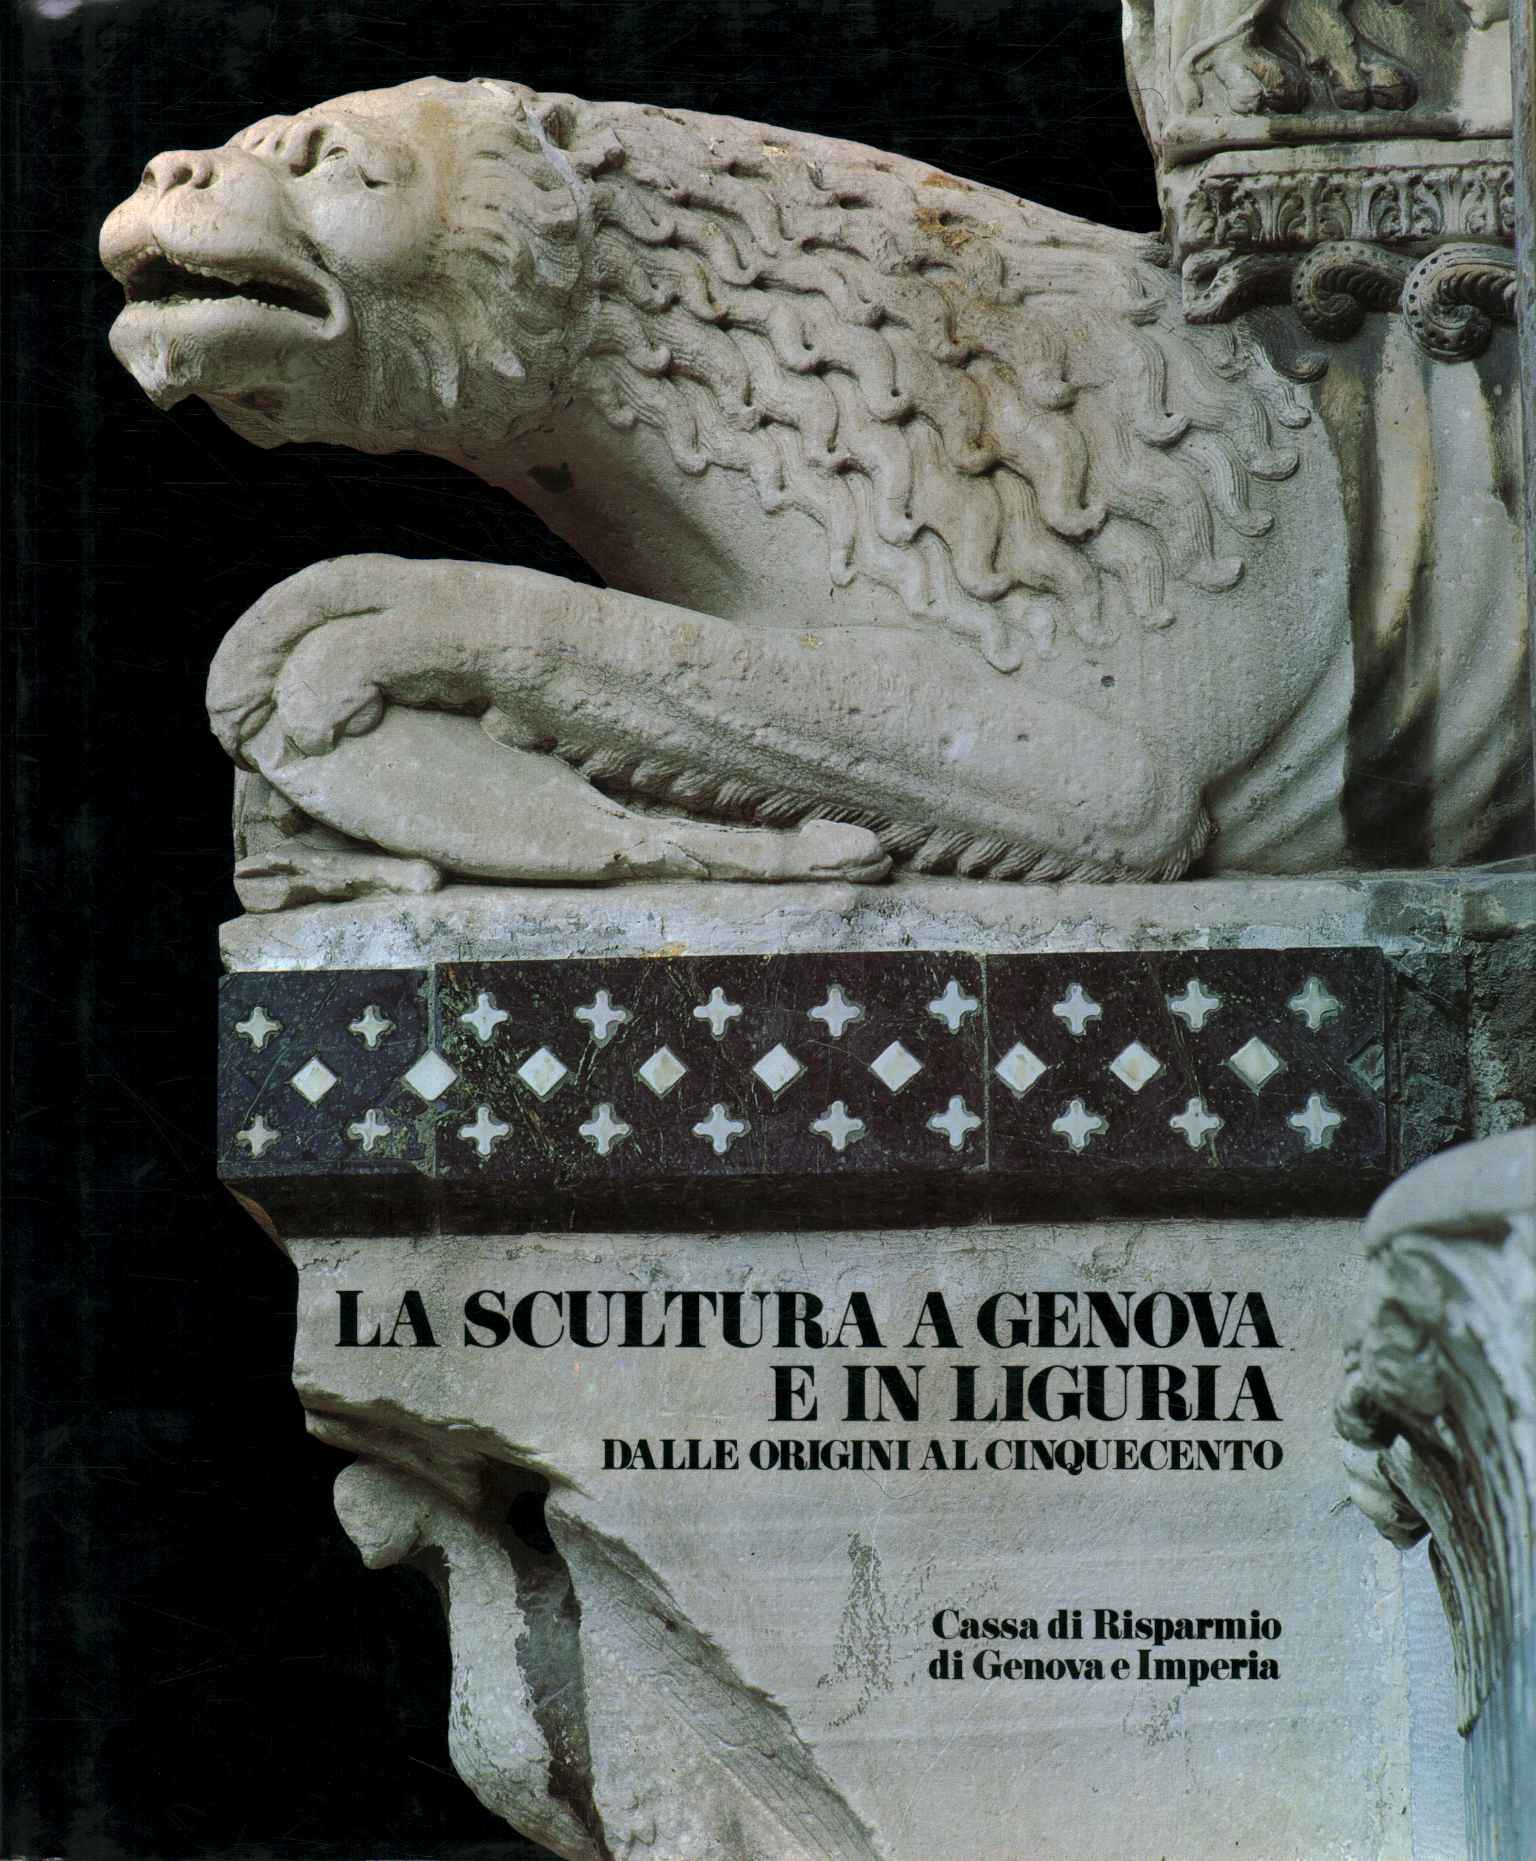 Sculpture in Genoa and Liguria from, Sculpture in Genoa and Liguria (V